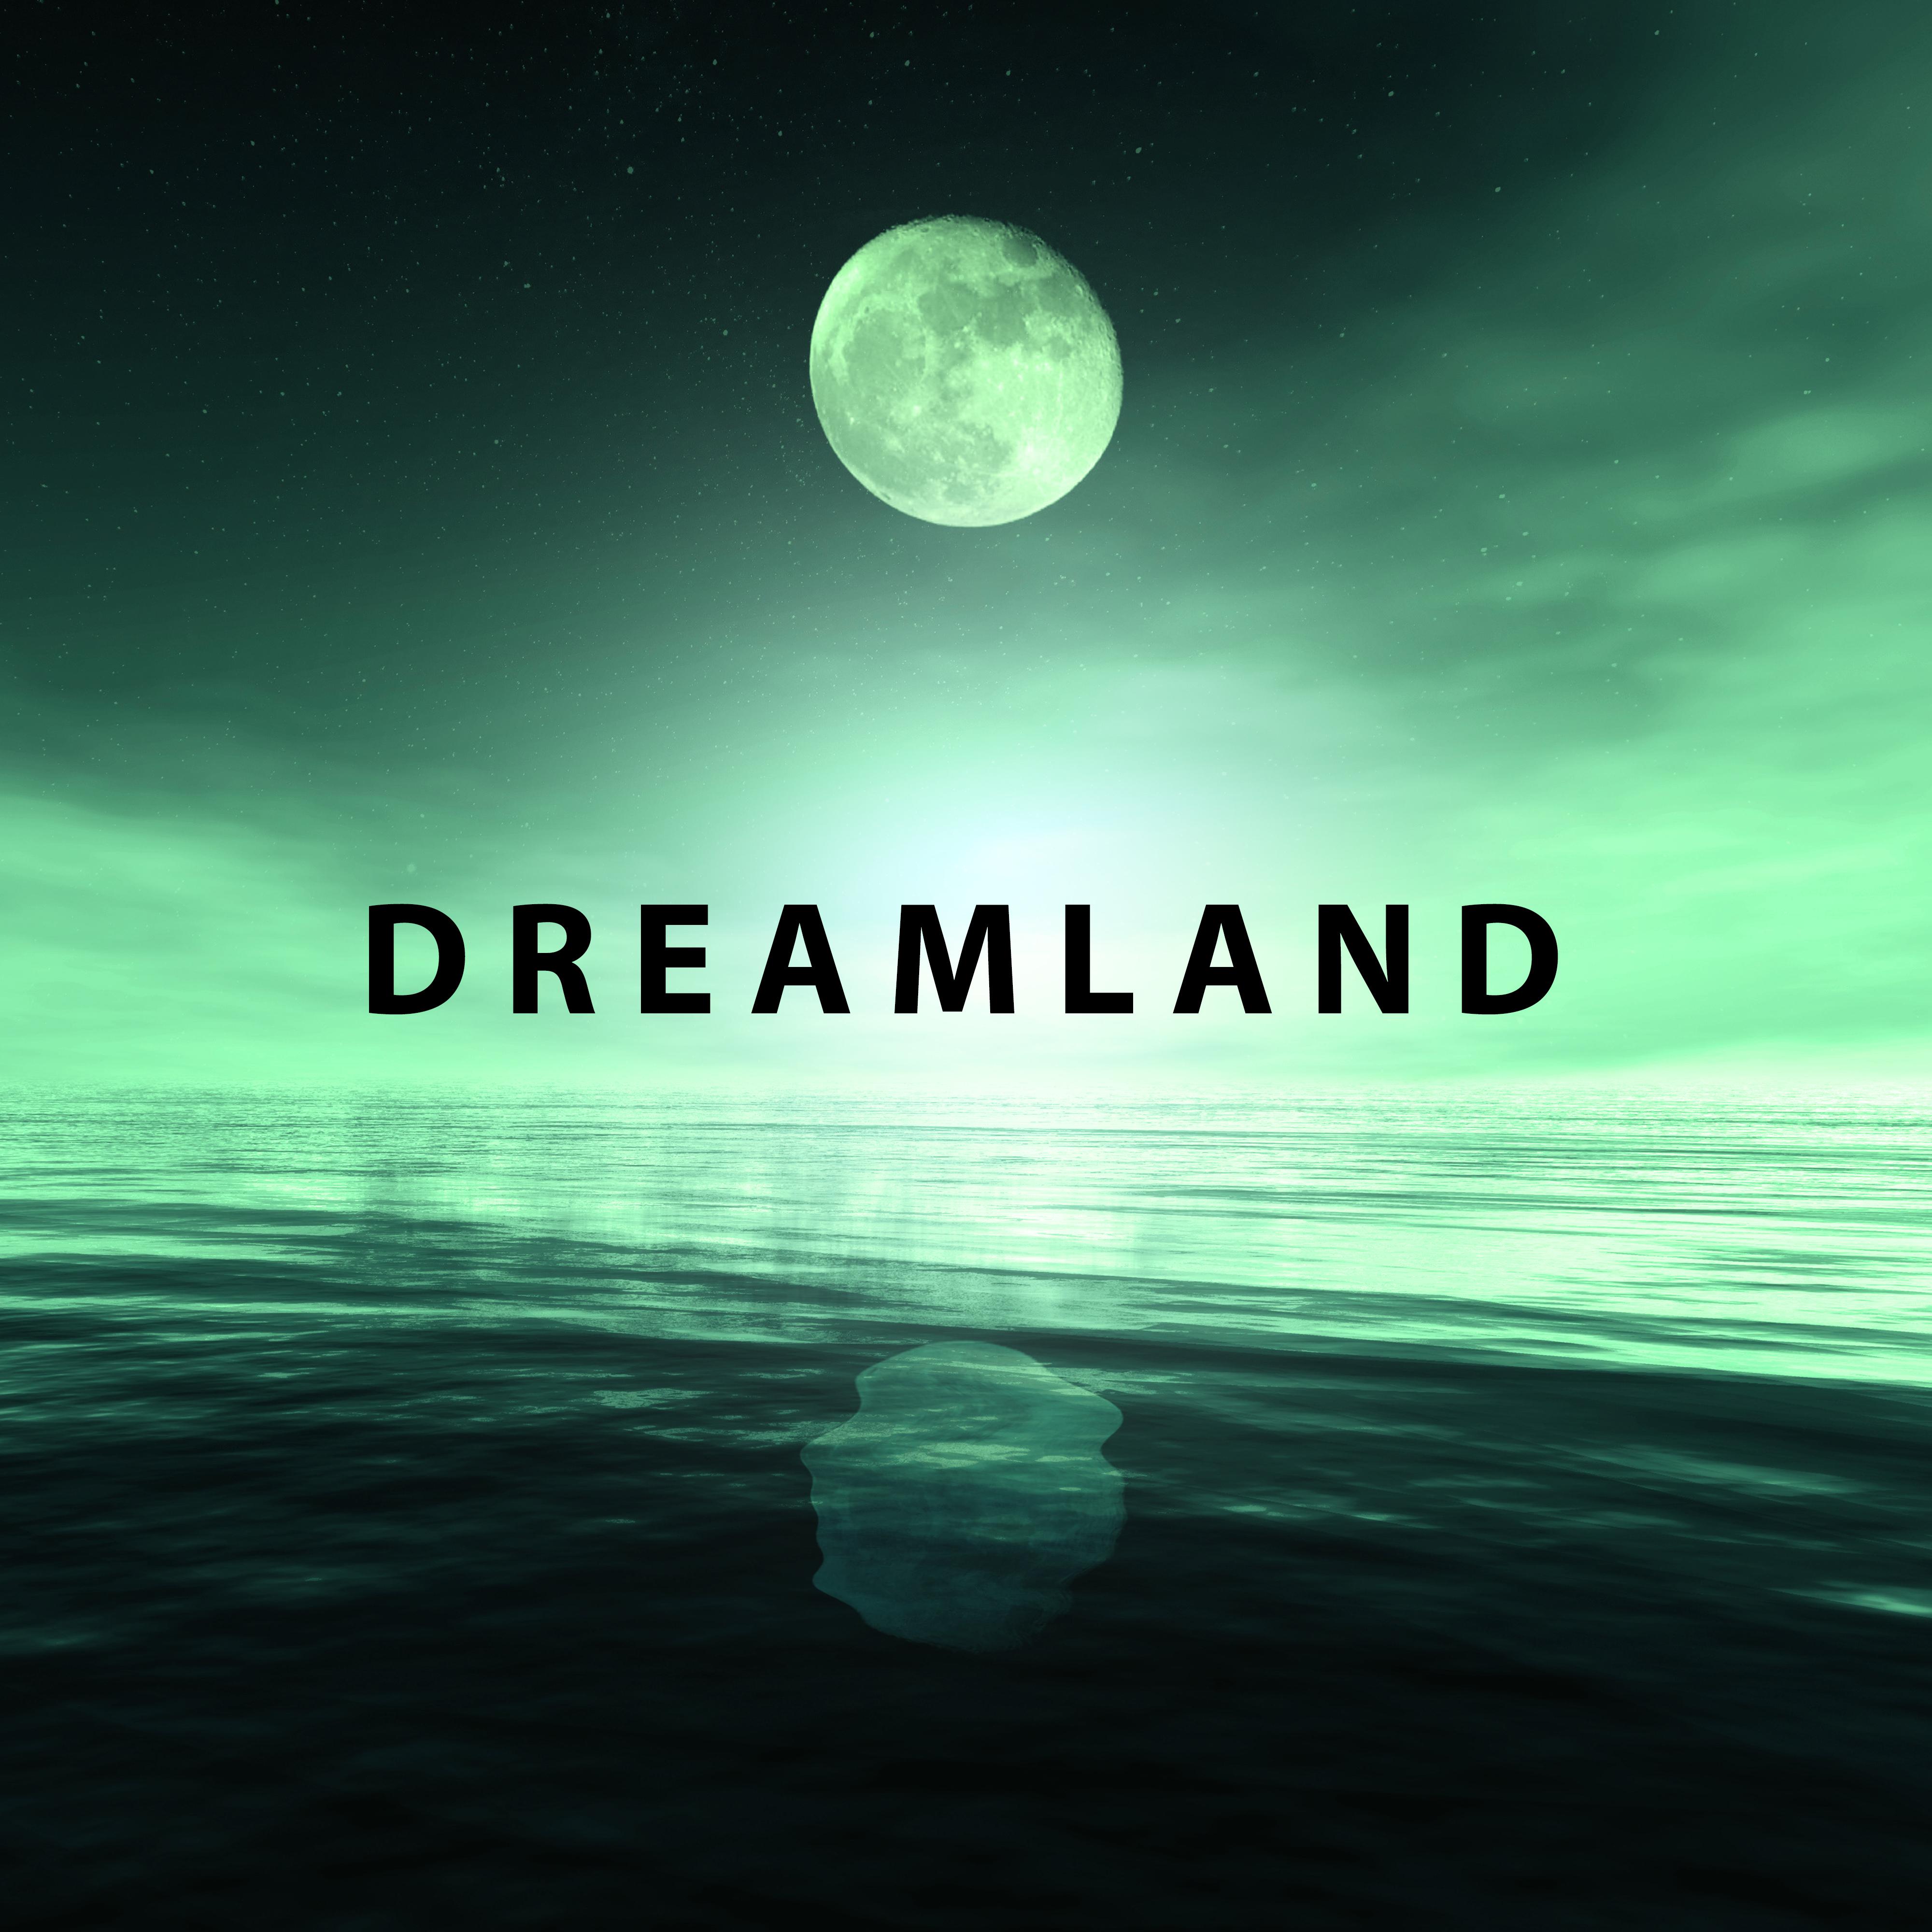 Dreamland – Soft Music for Sleep, Pure Mind, Calm Lullabies, Bedtime, Ambient Dream, Relaxing Night, New Age Music to Pillow